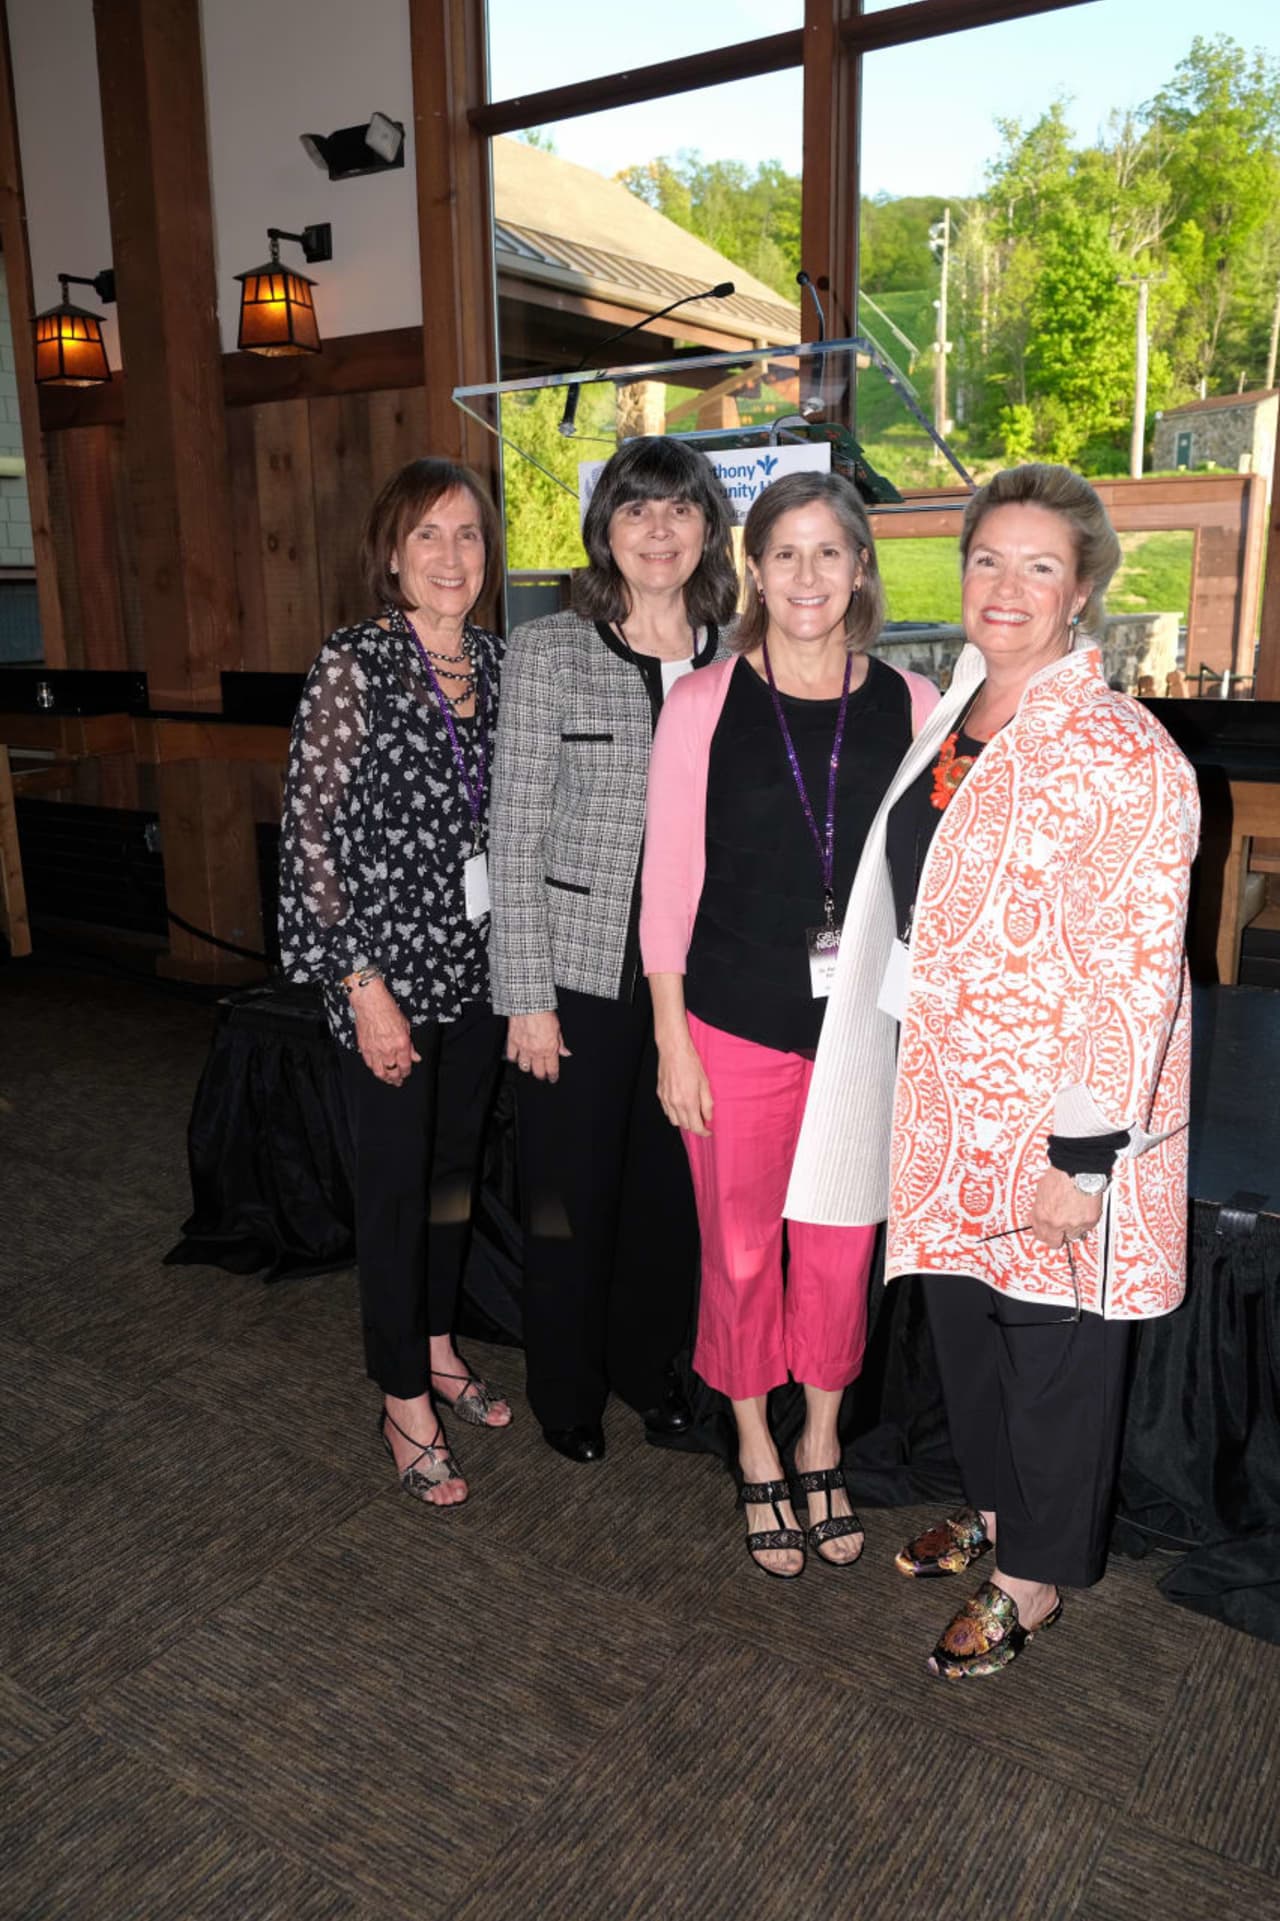 Girls’ Night Out Event Co-Chairs, Terry Quint (left) and Barbara Sullivan (right) flank Mary P. Leahy, MD, CEO of Bon Secours Charity Health System and Patricia Pollio, MD, OB/GYN at Advanced Physician Services in Goshen and Suffern.